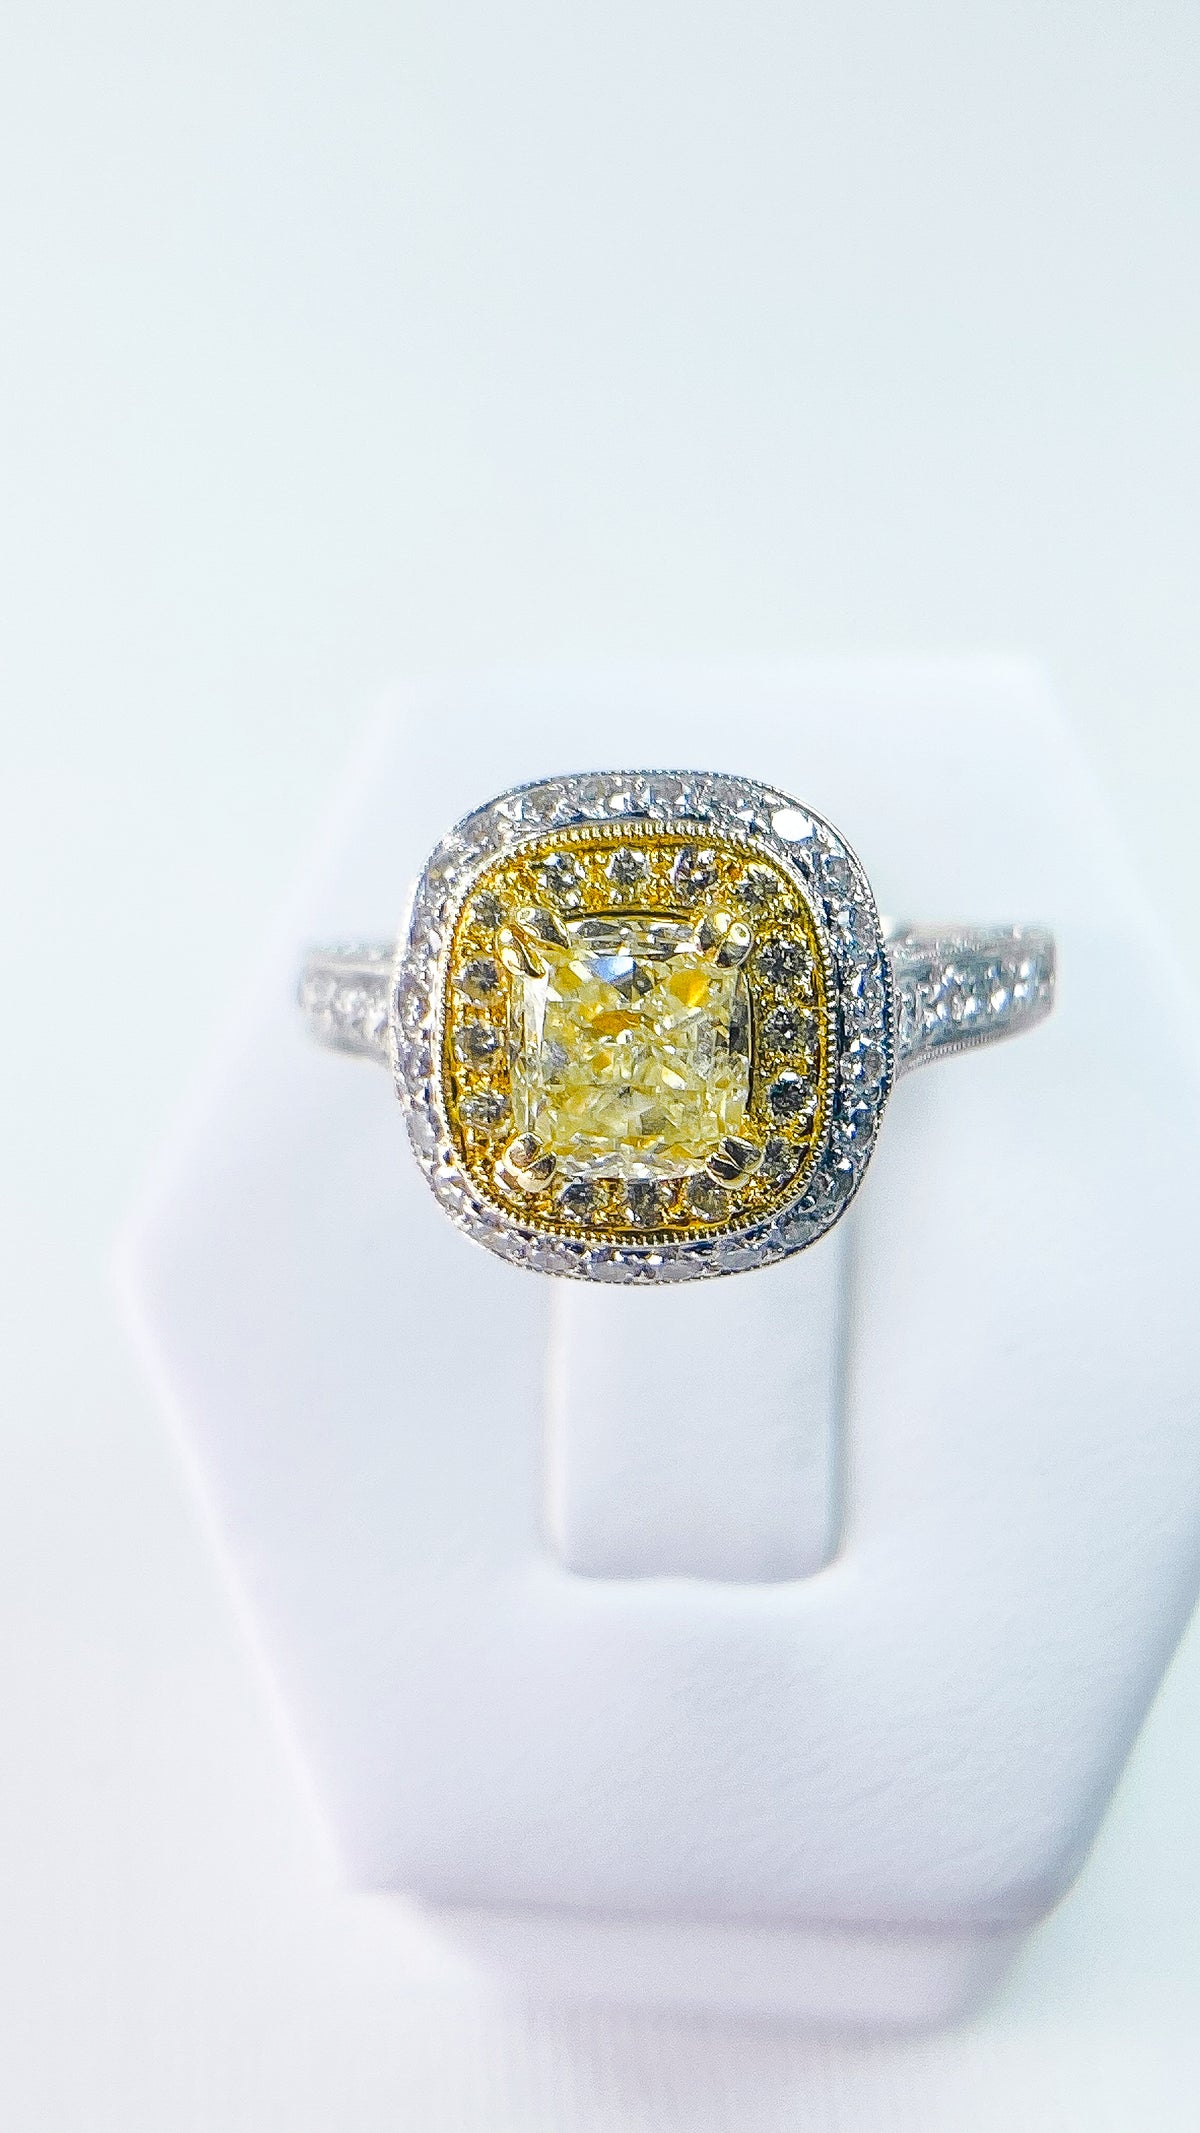 Ring, Fancy Yellow Cushion Cut Center Diamond w/ pave set round side diamonds, in 18kt yellow/white gold